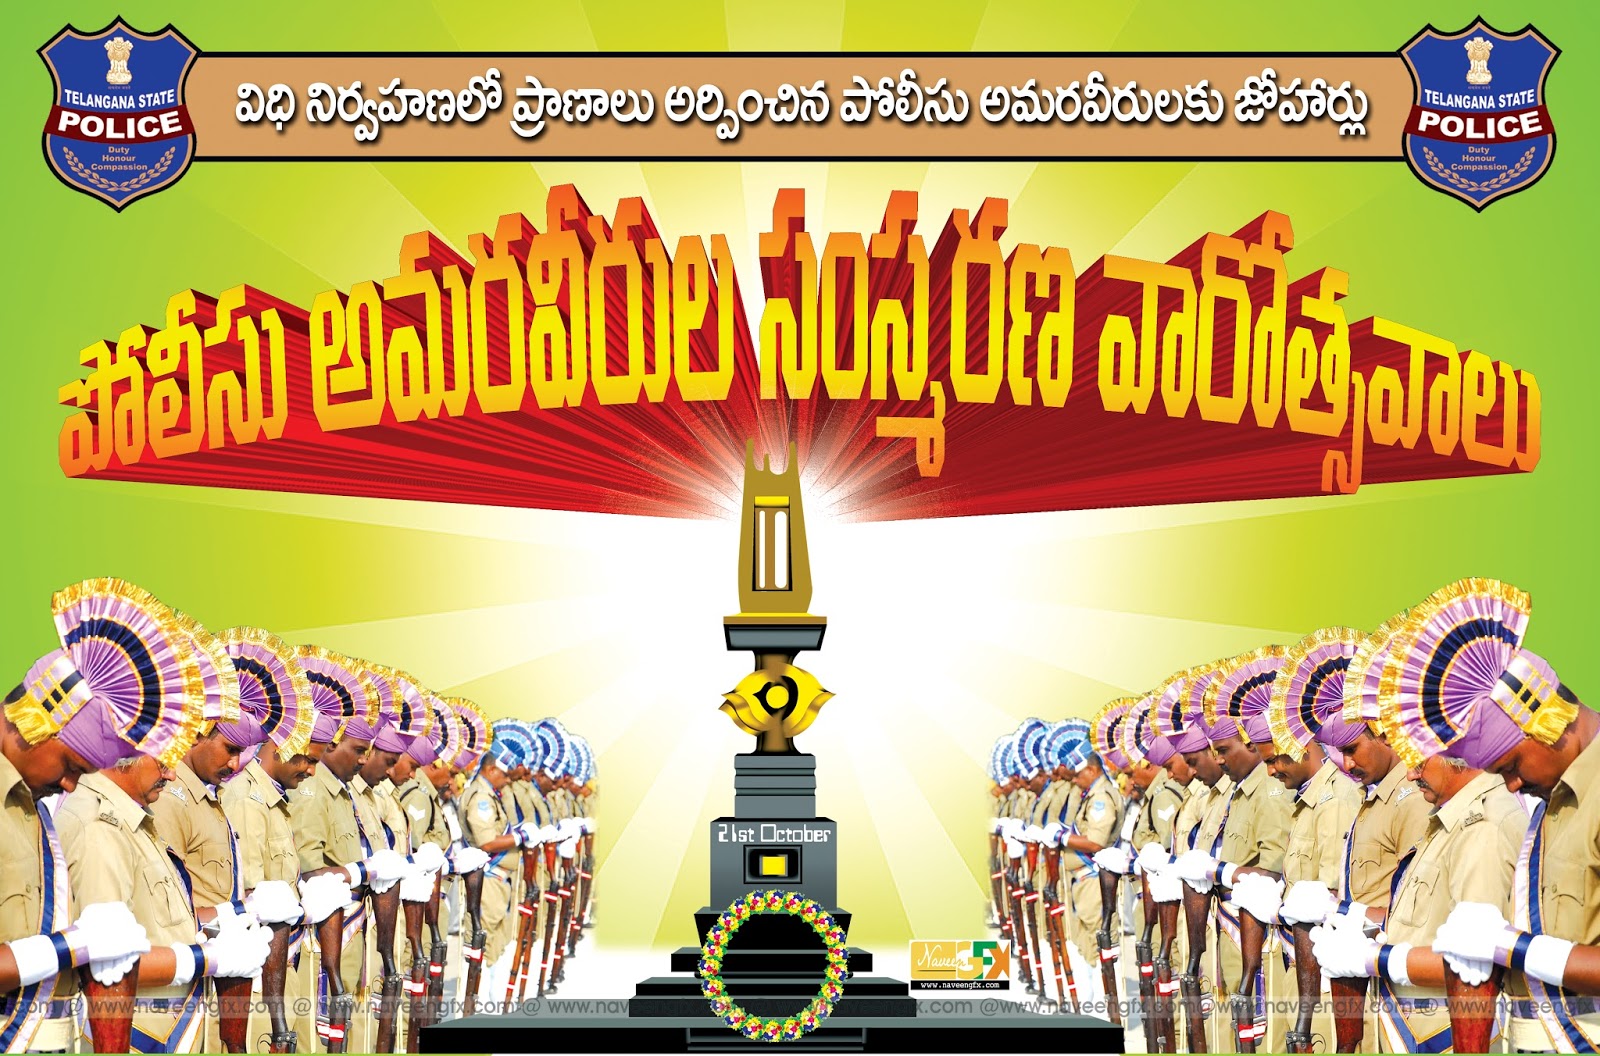 police commemoration day flex banner and poster in telugu | naveengfx